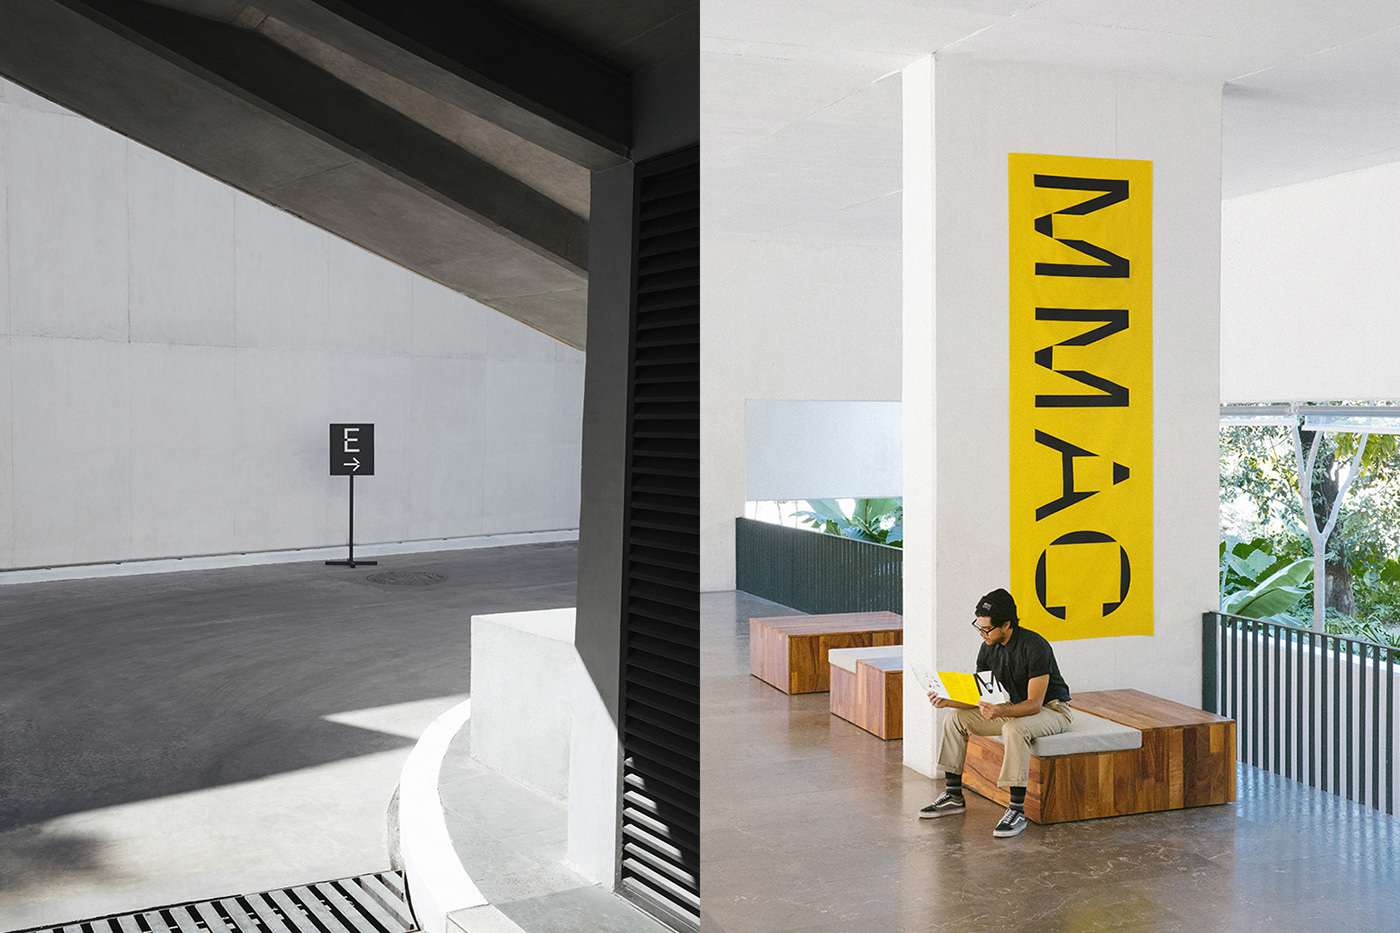 New Logo and Identity for MMAC by Sociedad Anónima